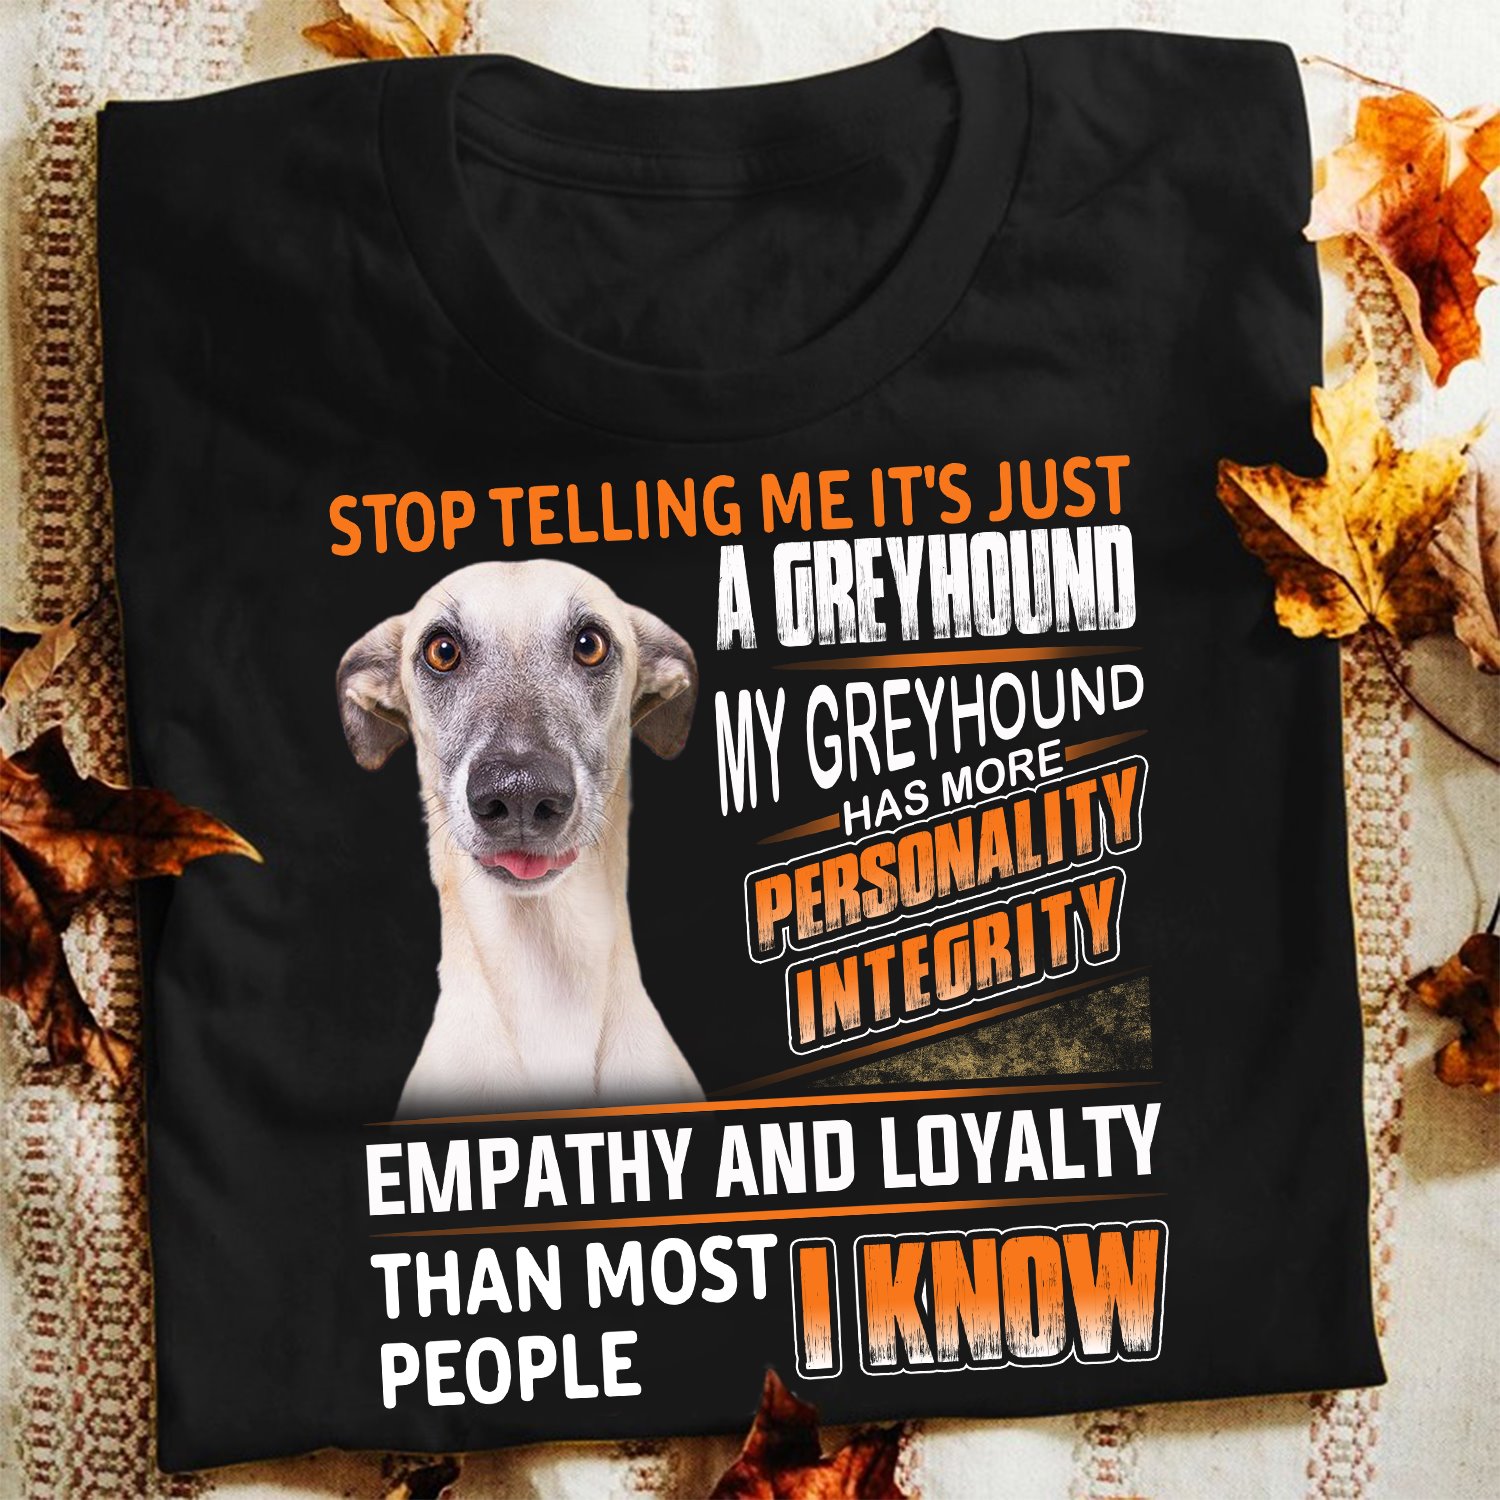 Stop telling me it's just a greyhound my greyhound has more personality integrity